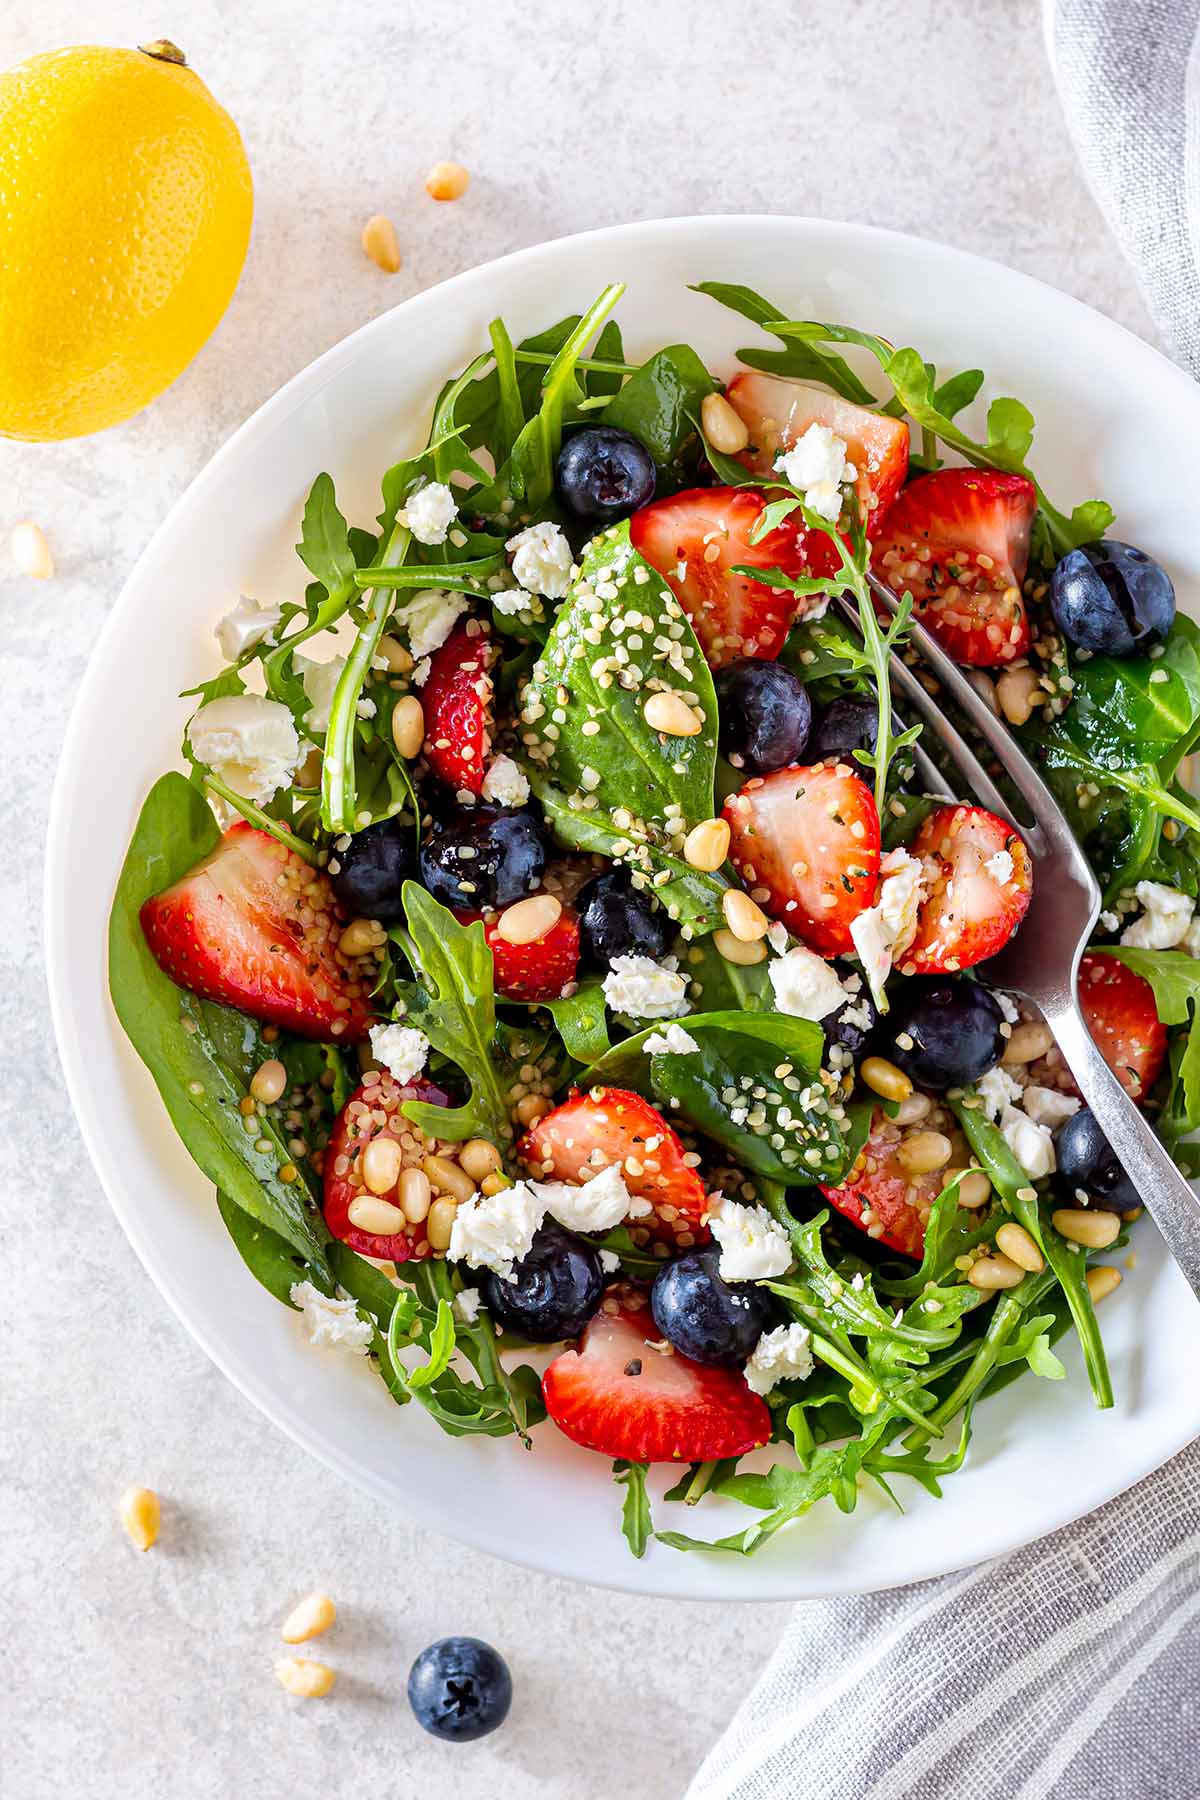 Green salad with strawberries, blueberries and feta chese in a serving plate